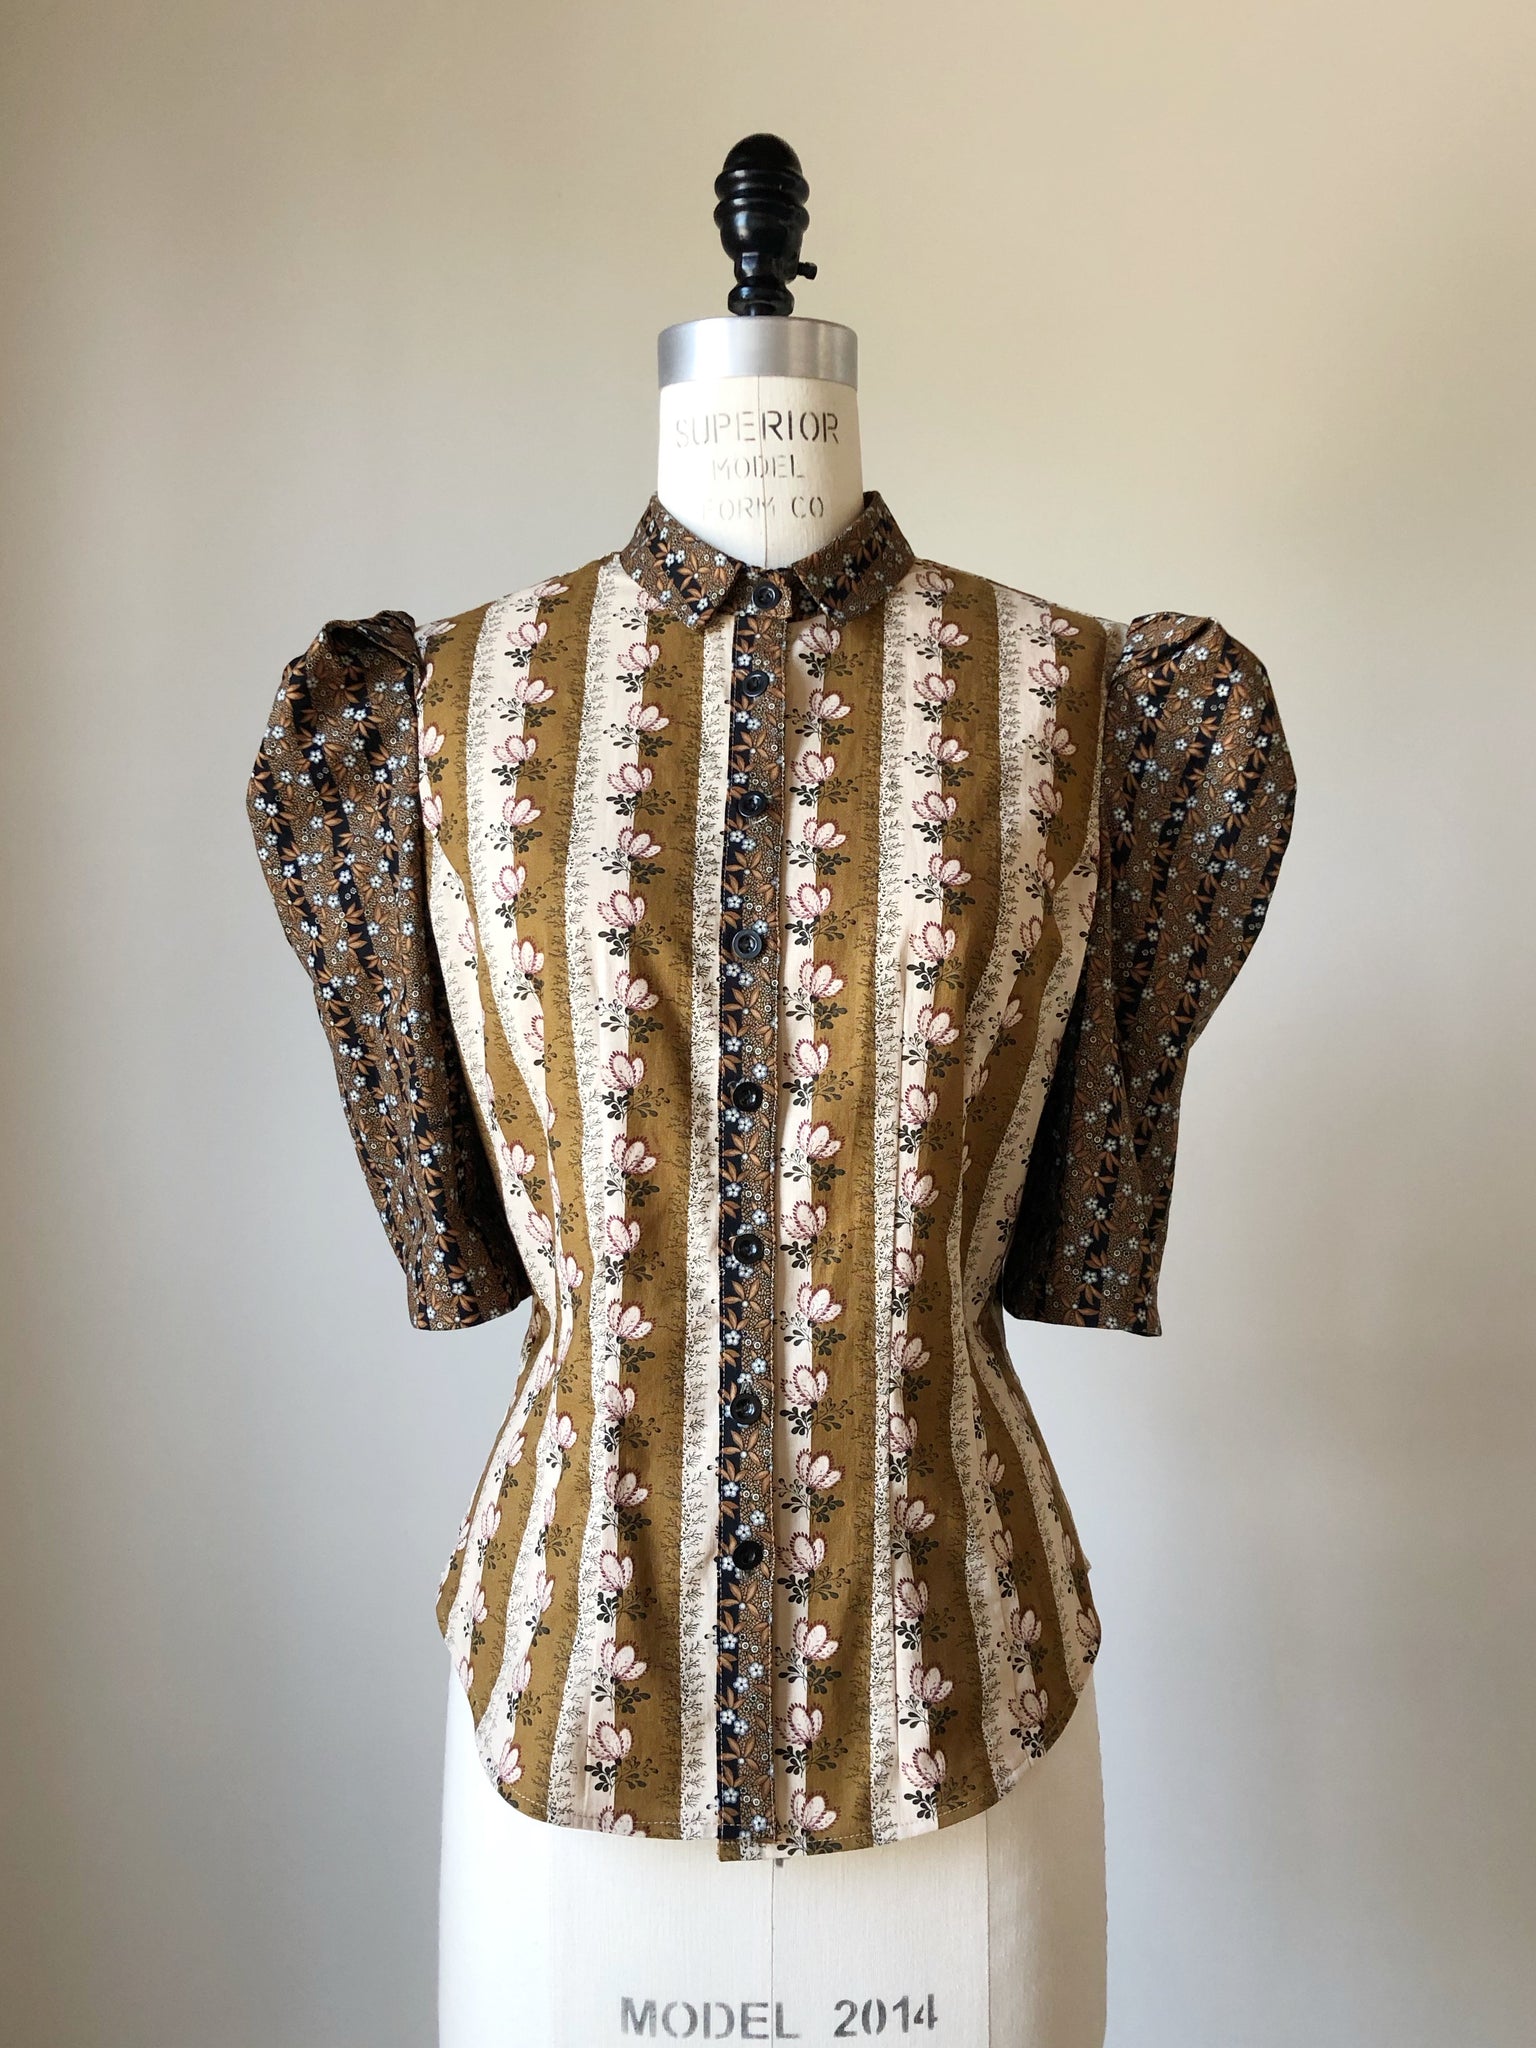 Lillian work shirt in 19th century reproduction prints #2